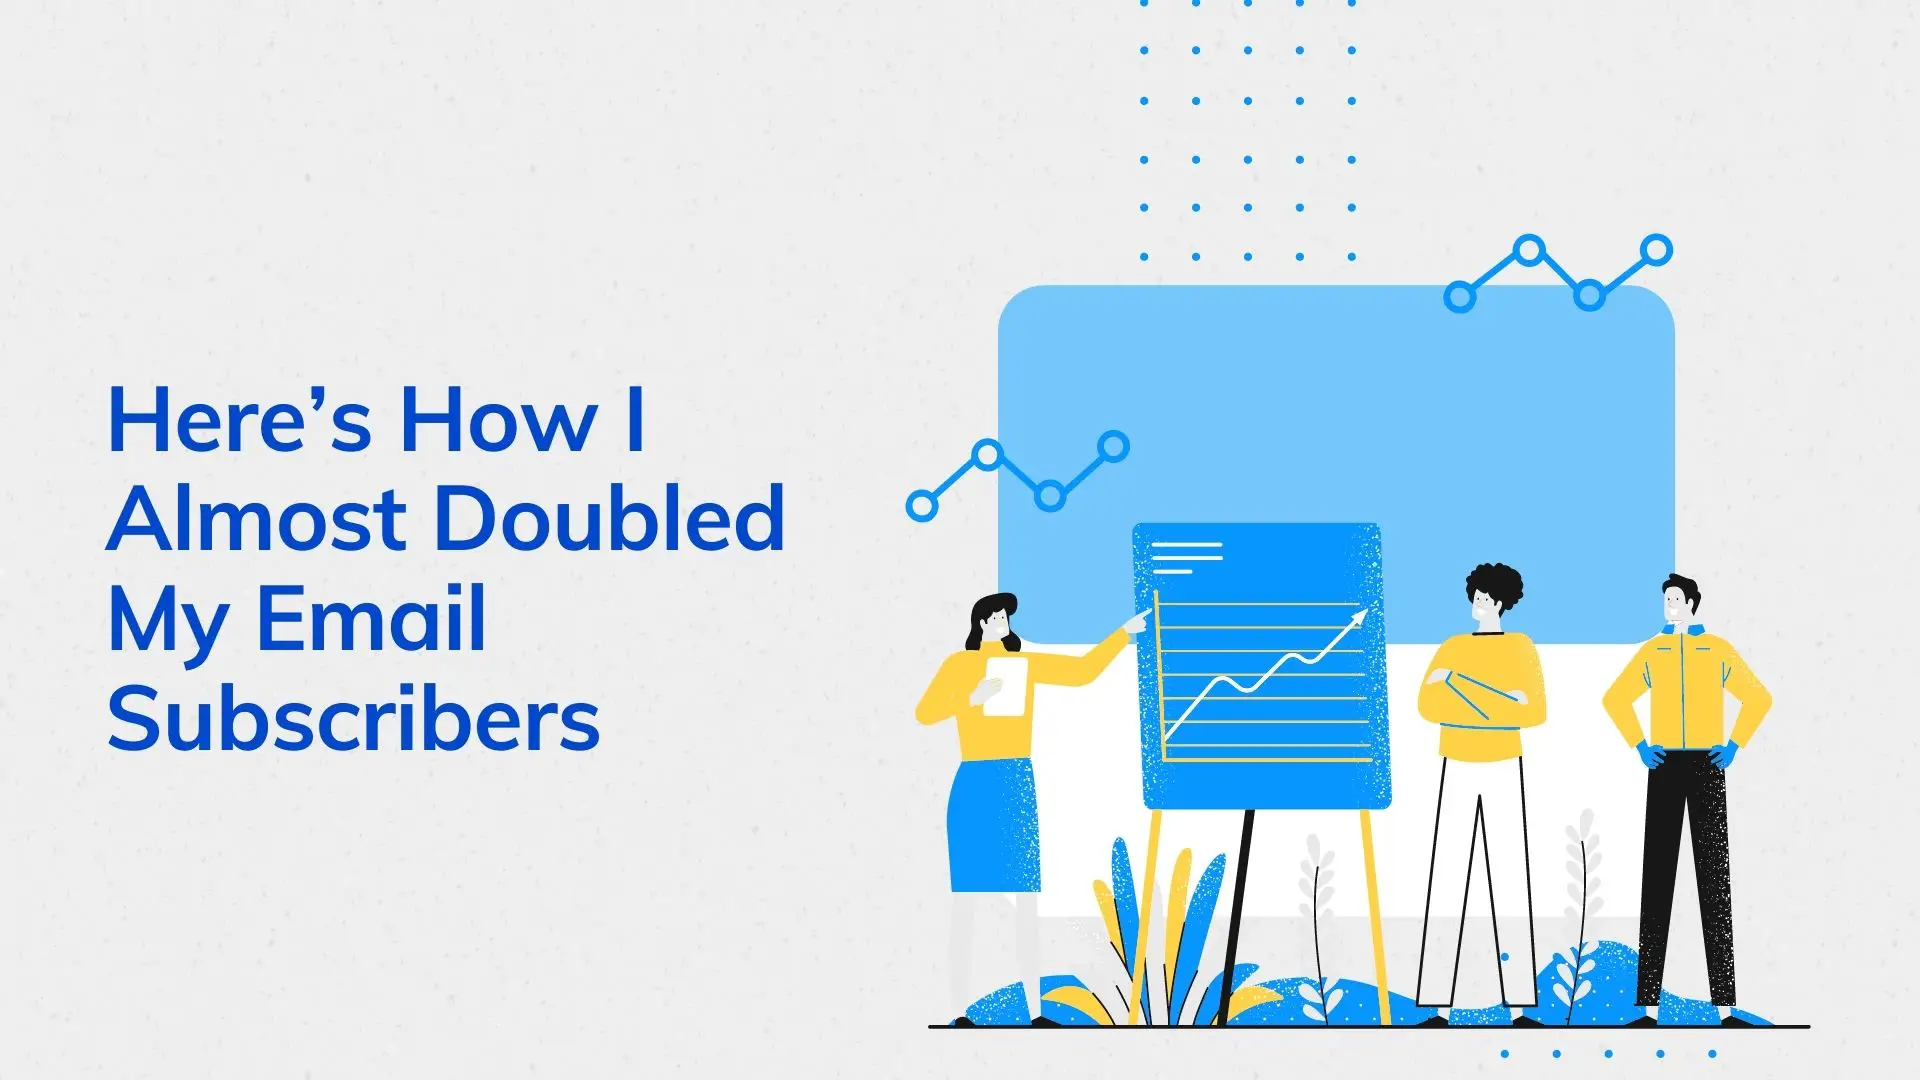 Here’s How I Almost Doubled My Email Subscribers